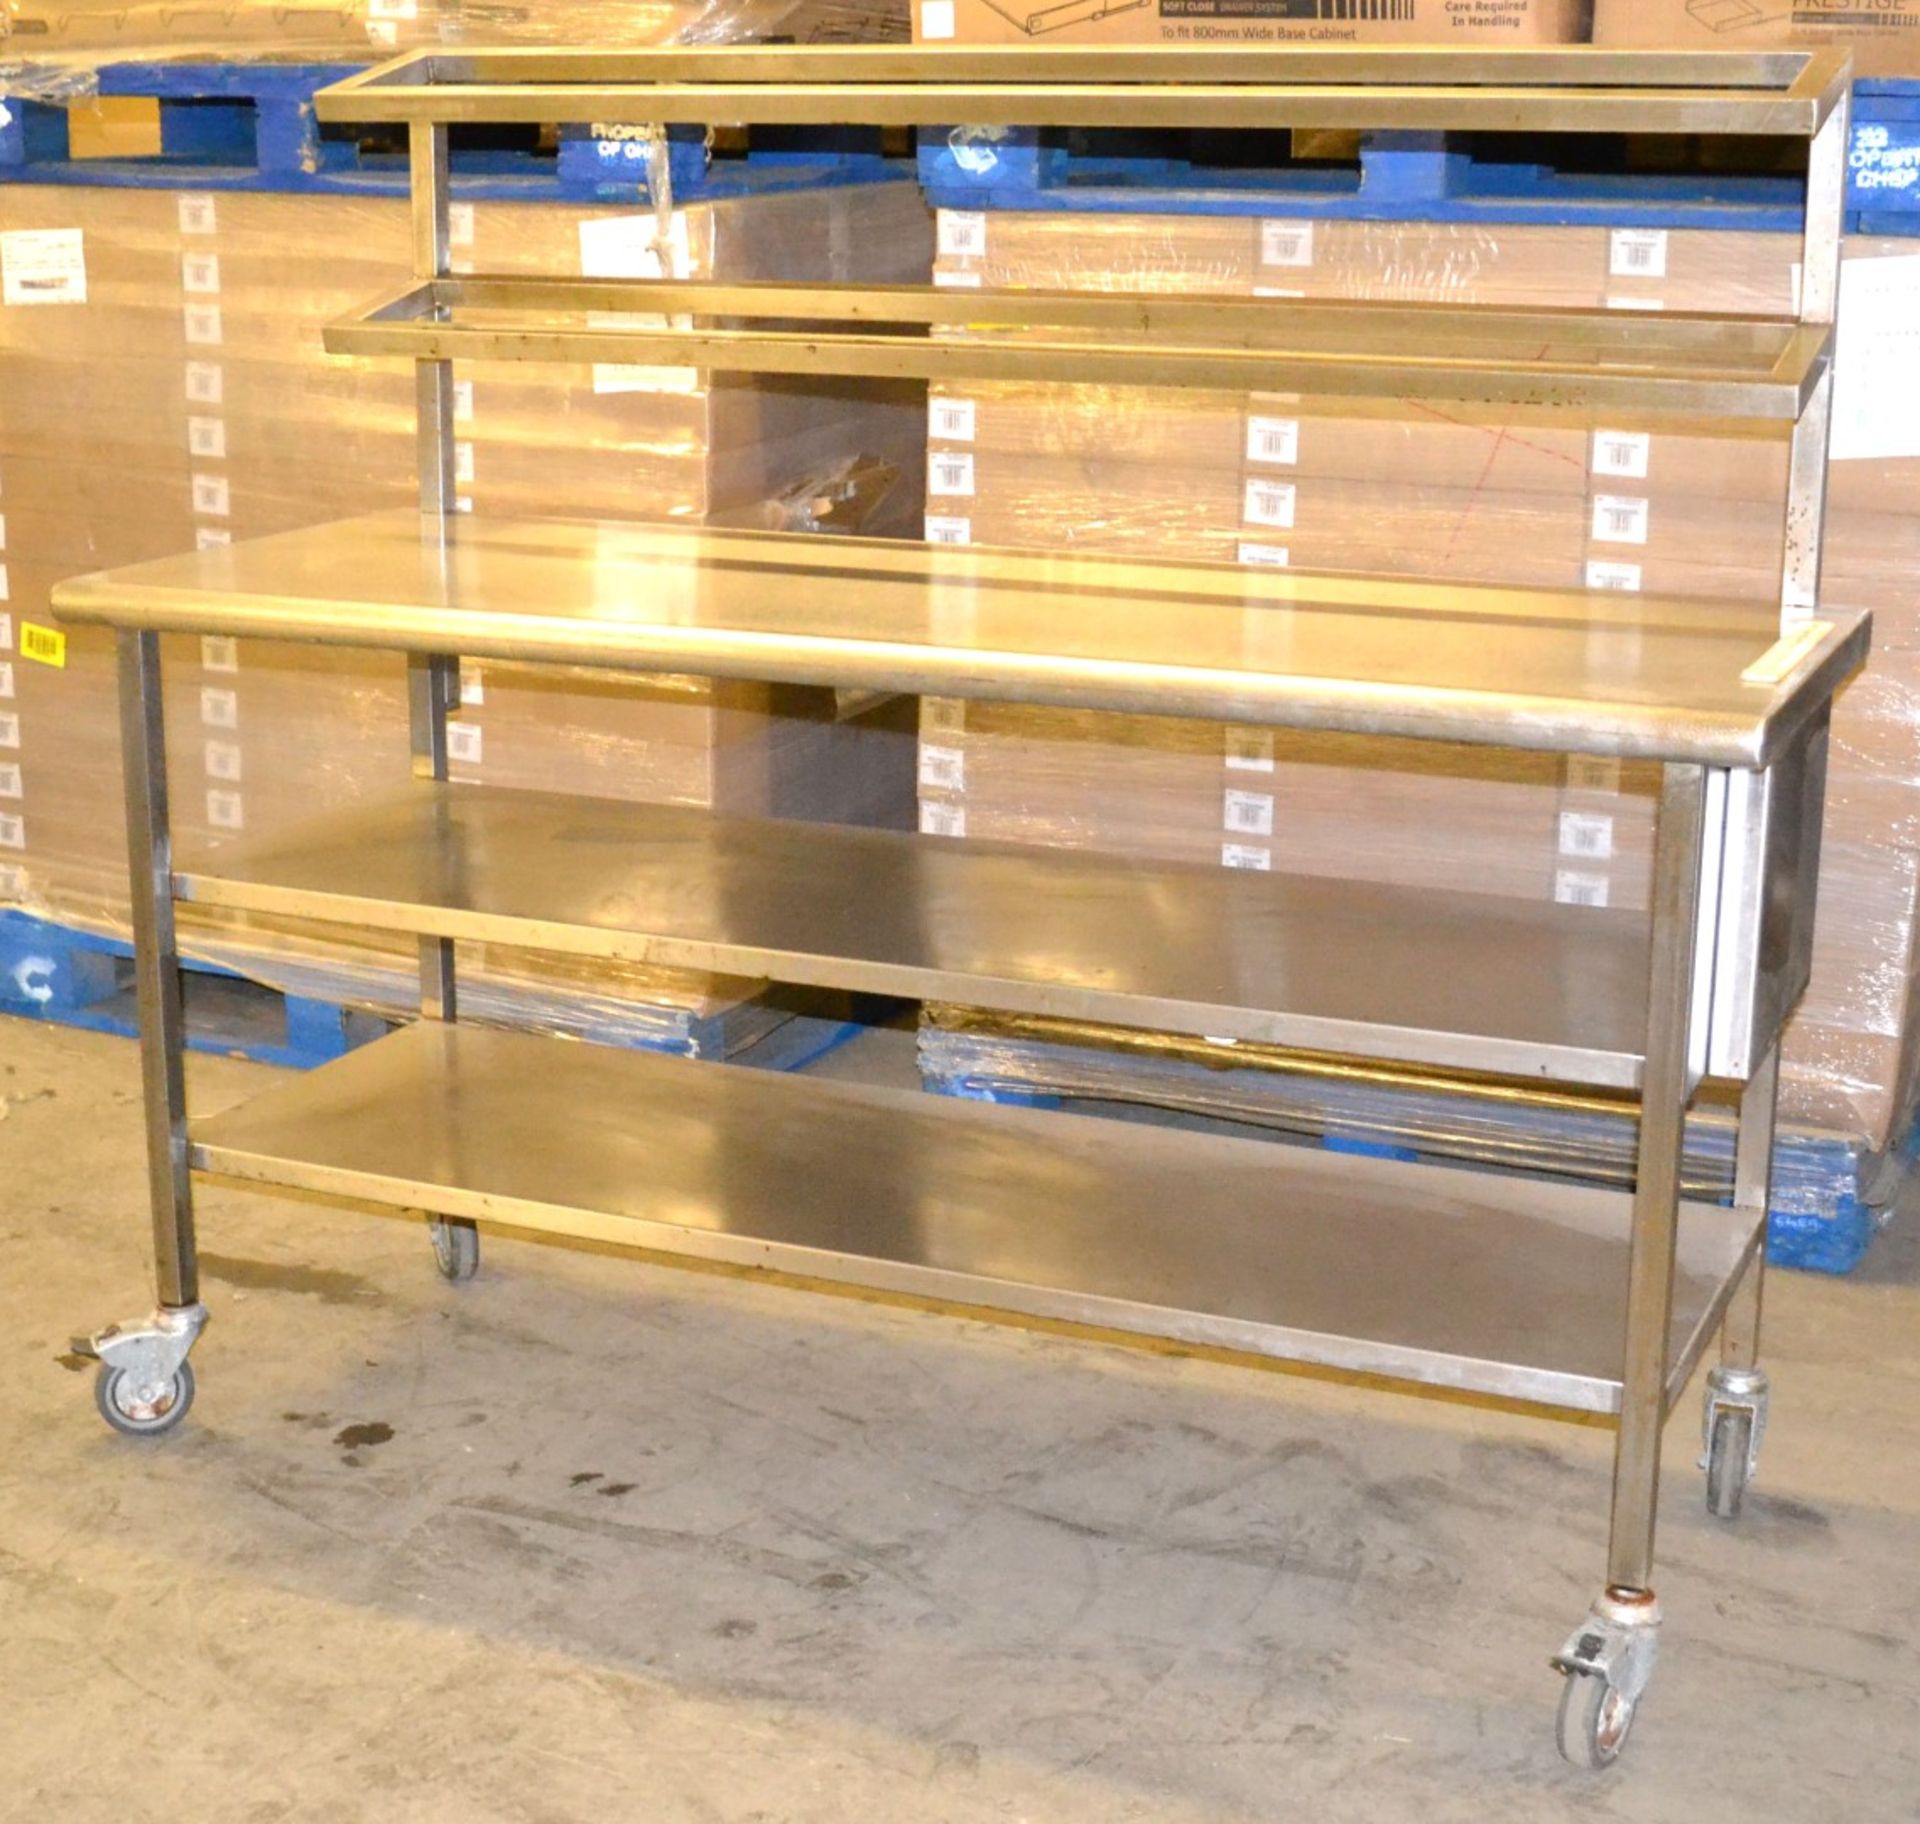 1 x Wheeled Stainless Steel Sandwich Preparation Table - Dimensions: 160 x 60 x 137.5cm - Ref: MC144 - Image 2 of 5